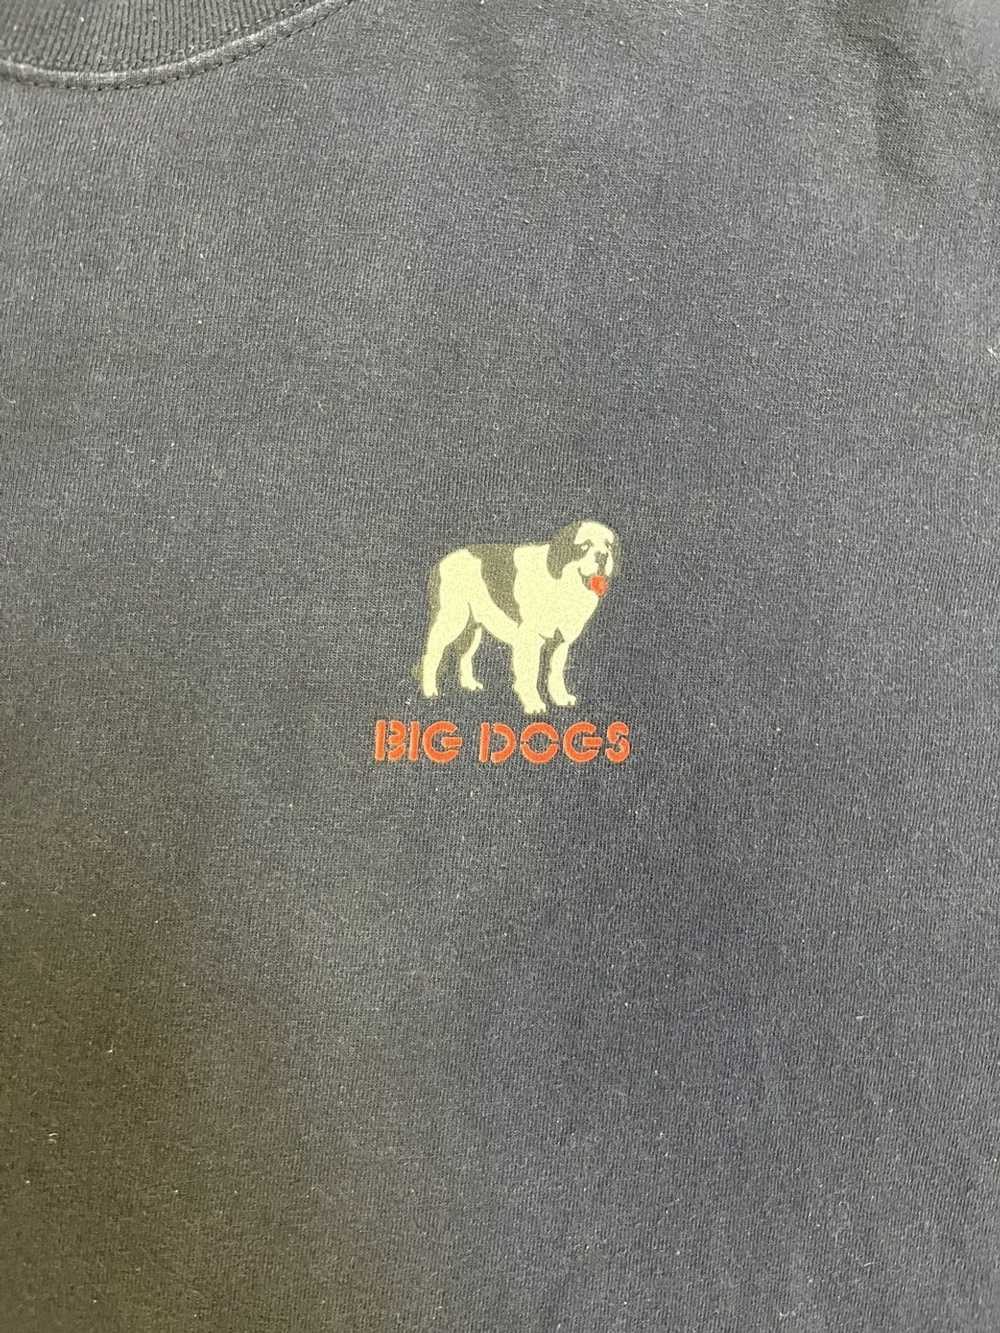 Big Dogs × Streetwear 2004 Big dogs “bustin ours … - image 4